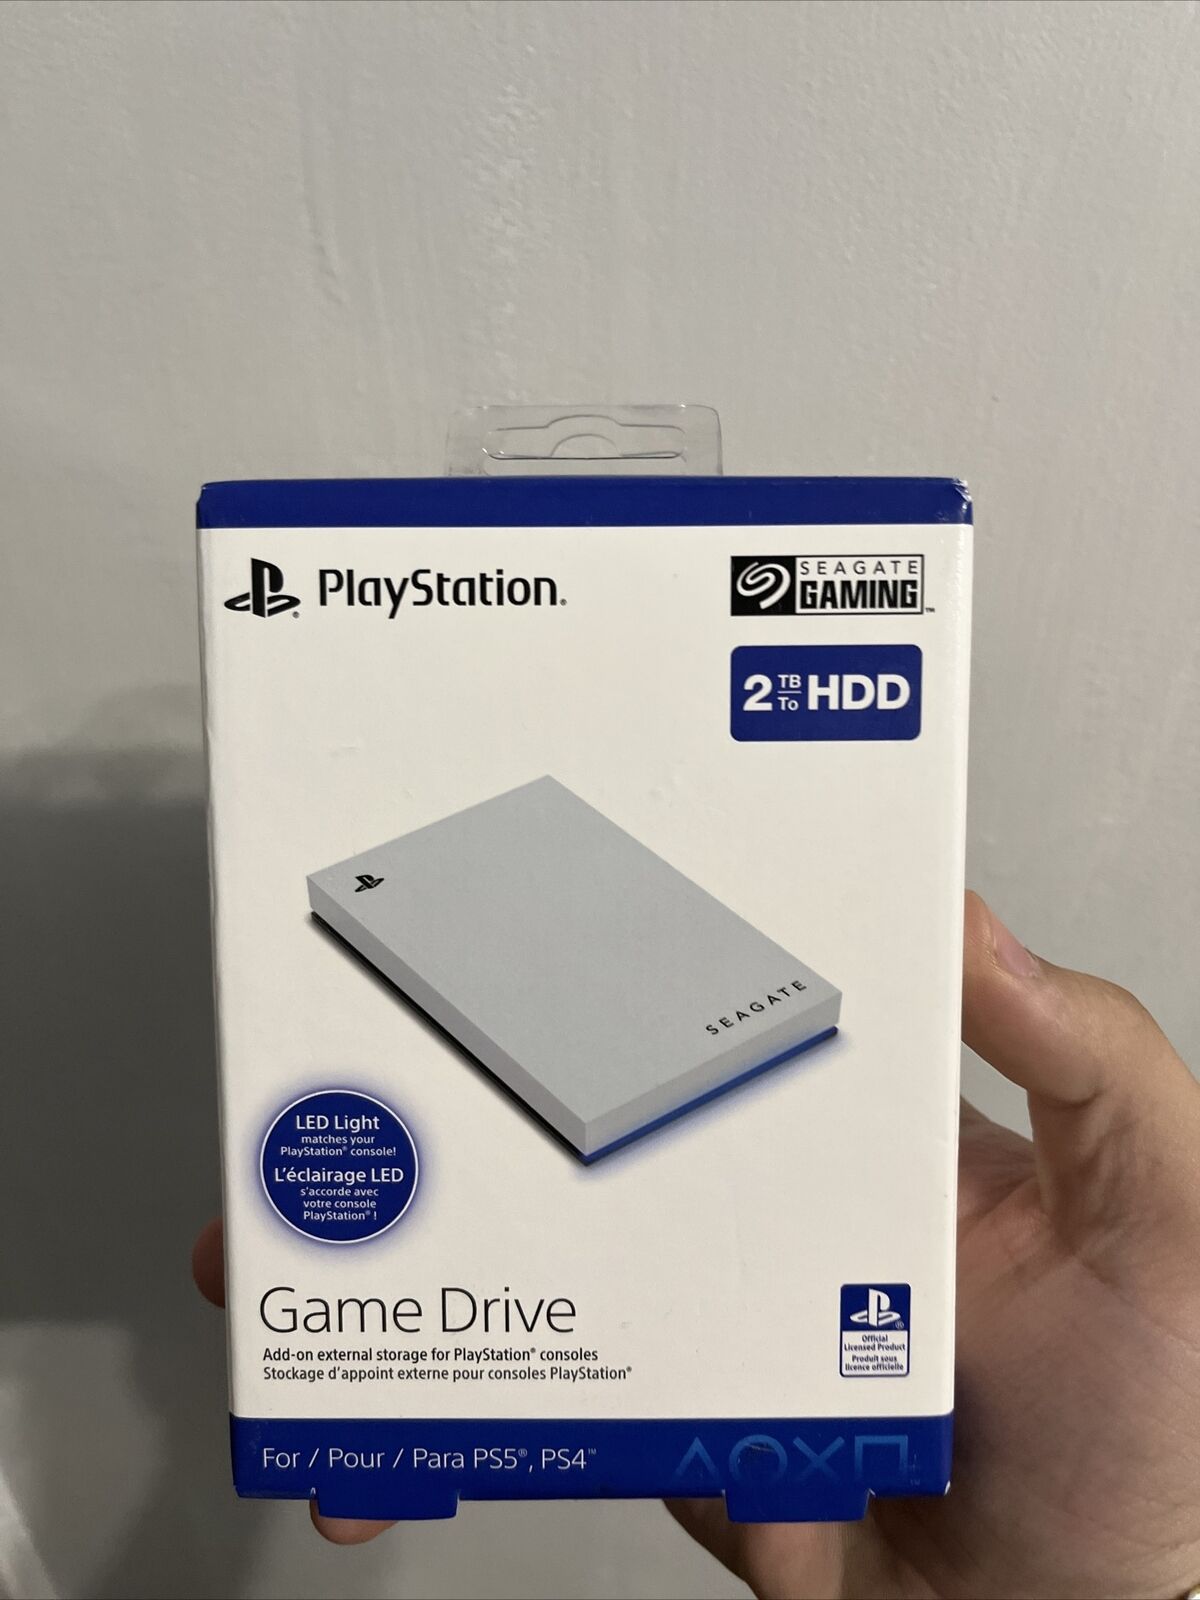 Seagate Game Drive for PS5 2TB External HDD - USB 3.0, Officially Licensed, Blue